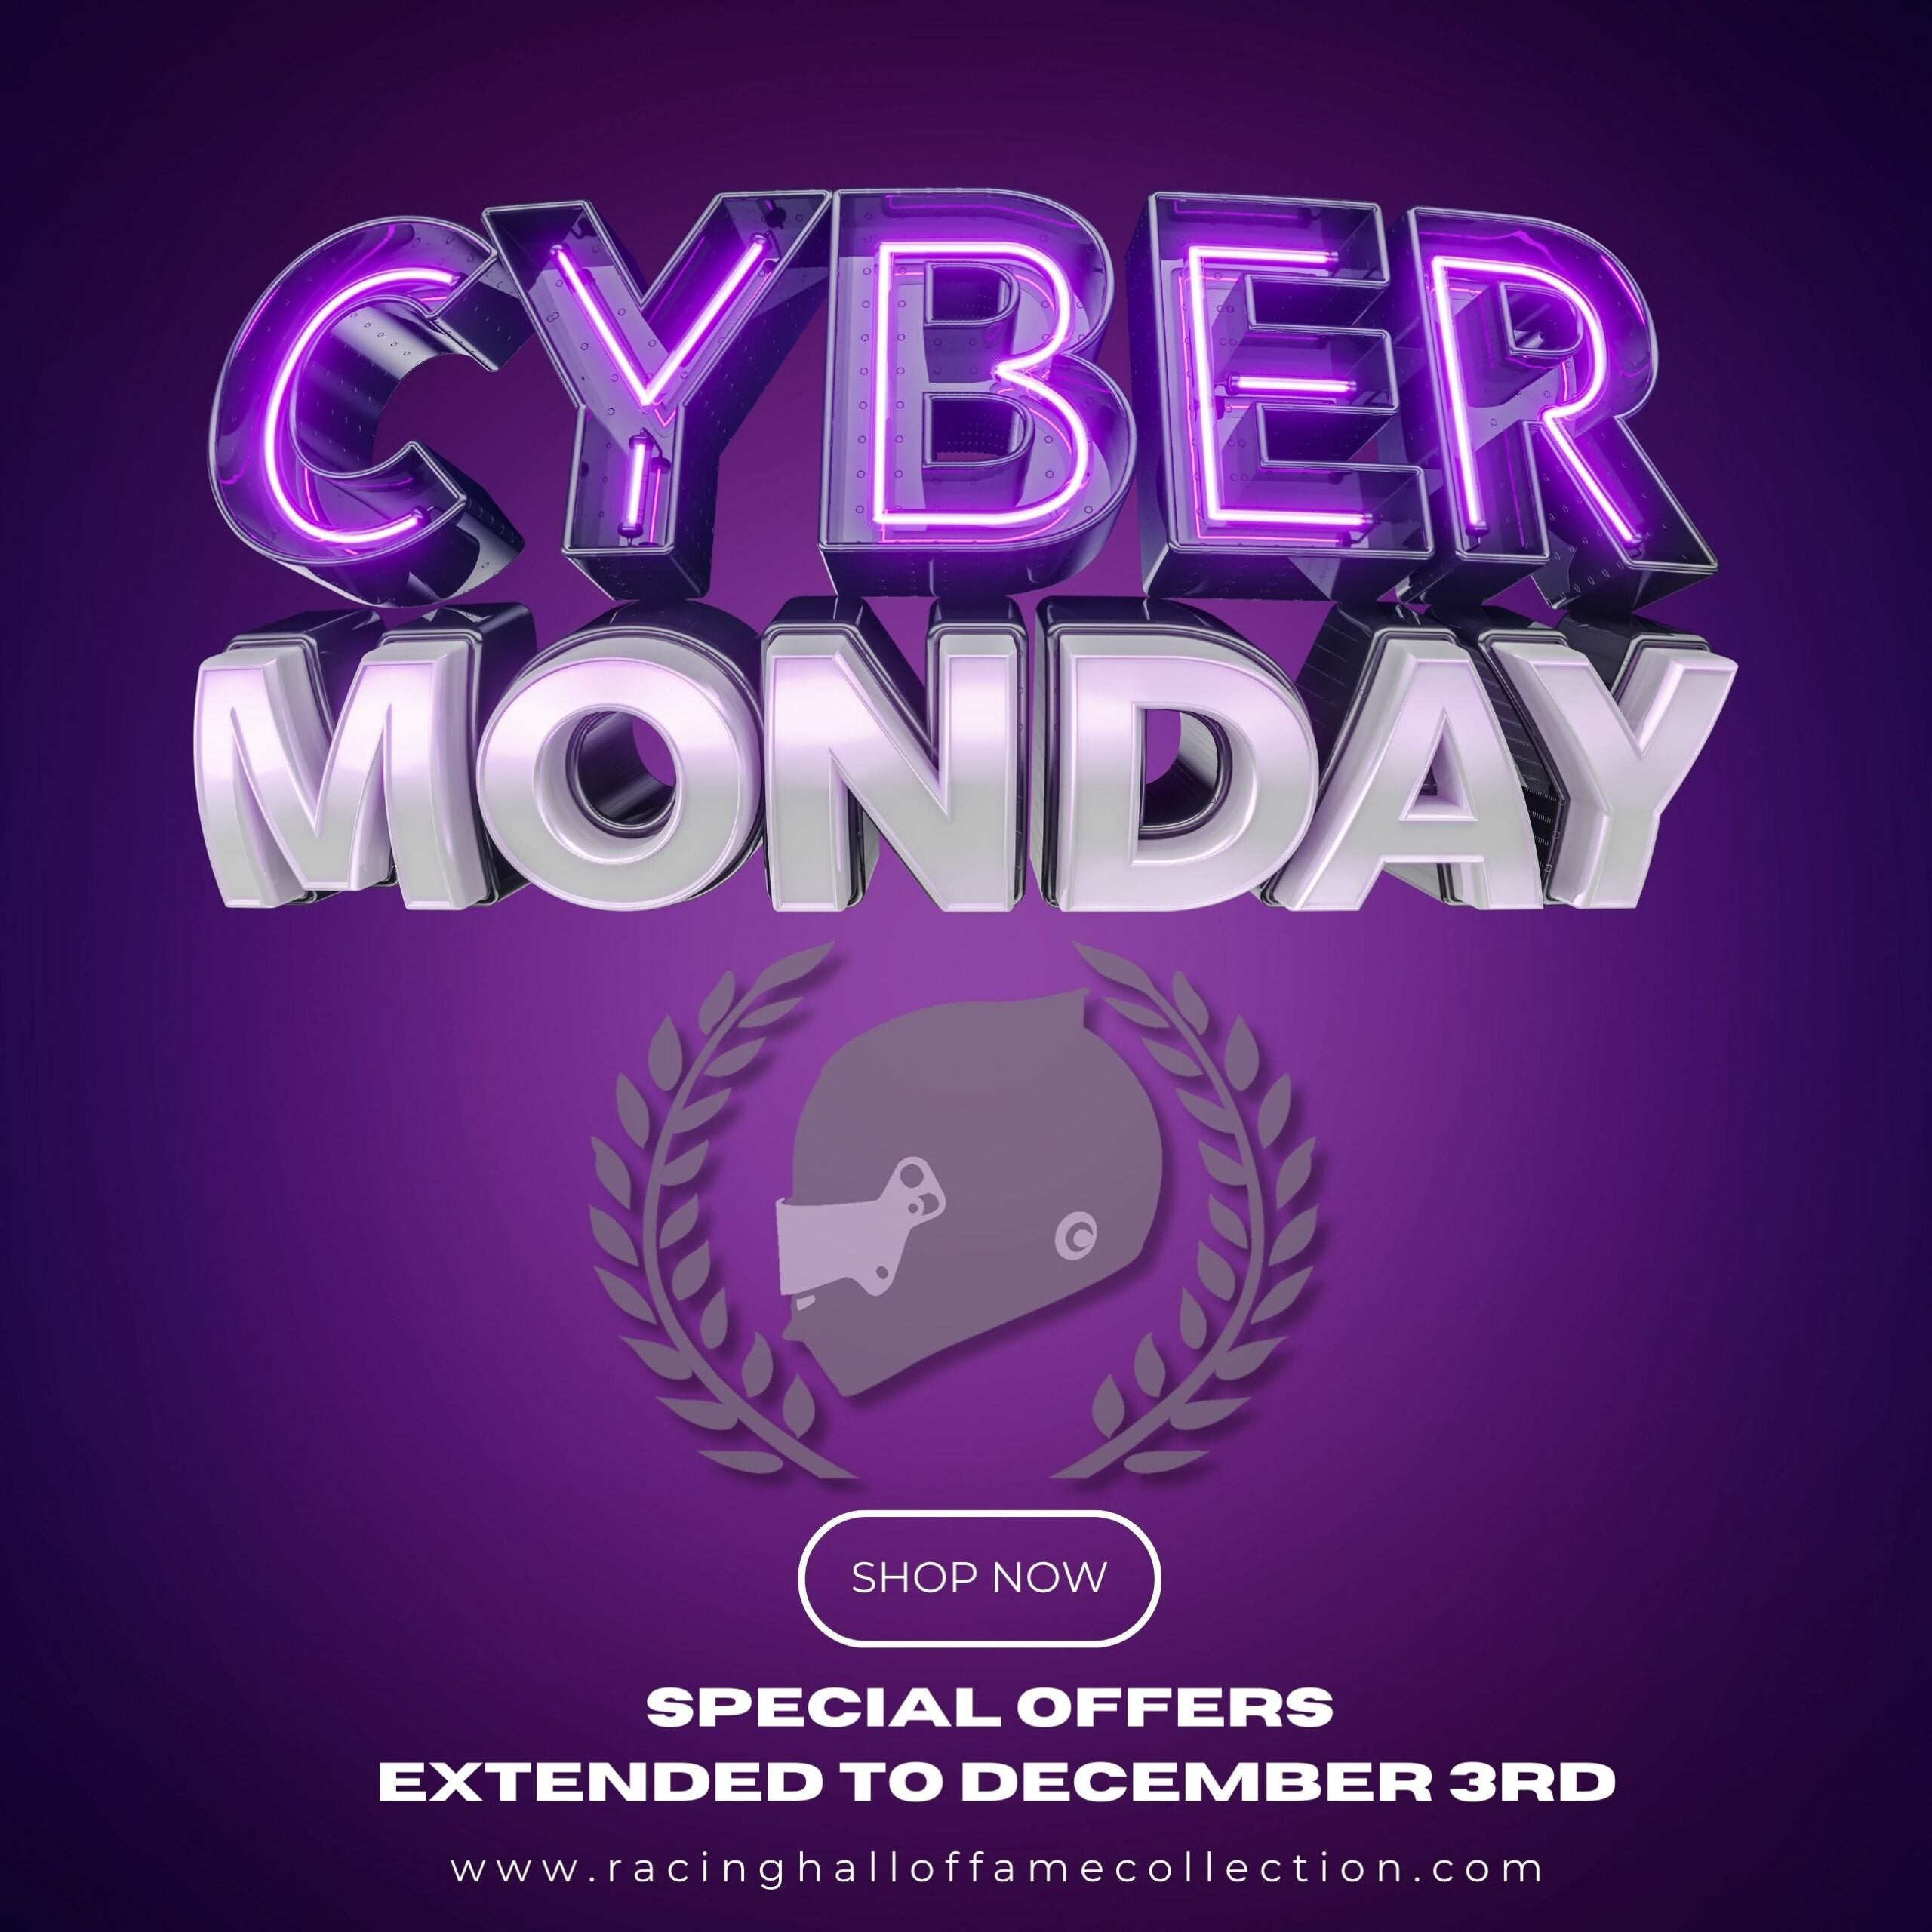 CYBER MONDAY EXTENDED!